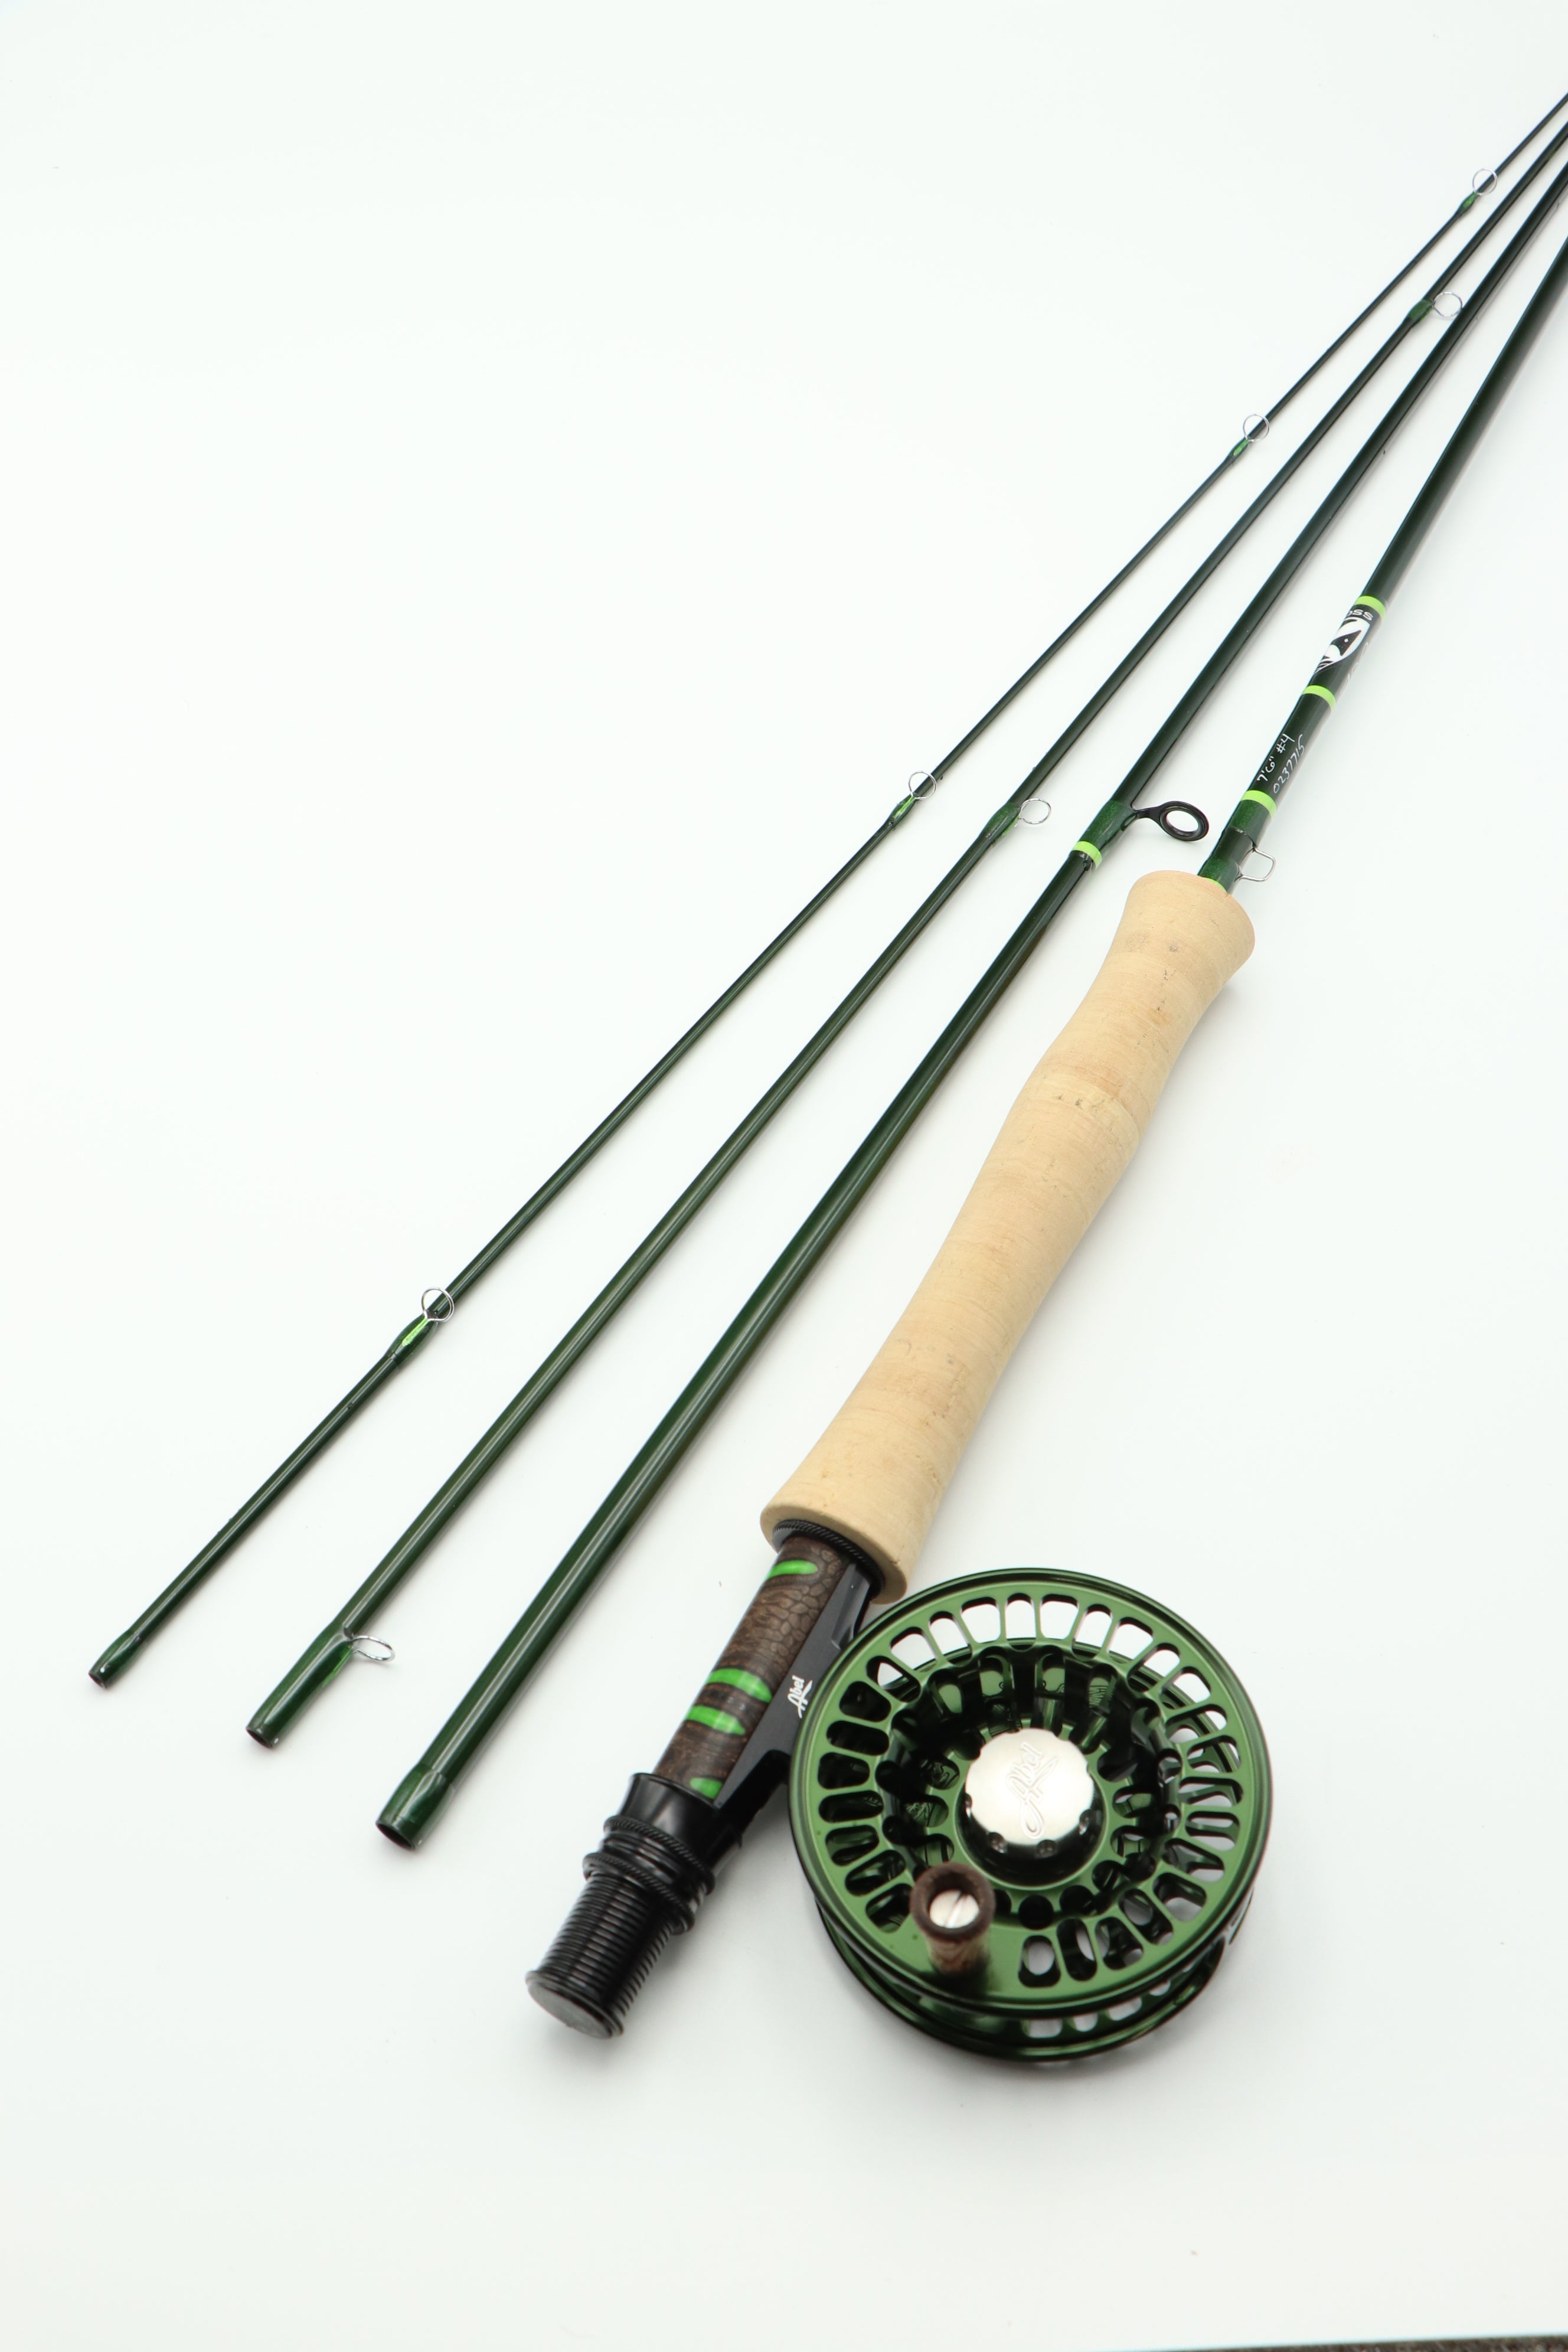 Fly Rods & Combos - Tight Trout Stream 4pc 7ft fly rods - 3/4 or 5/6wts